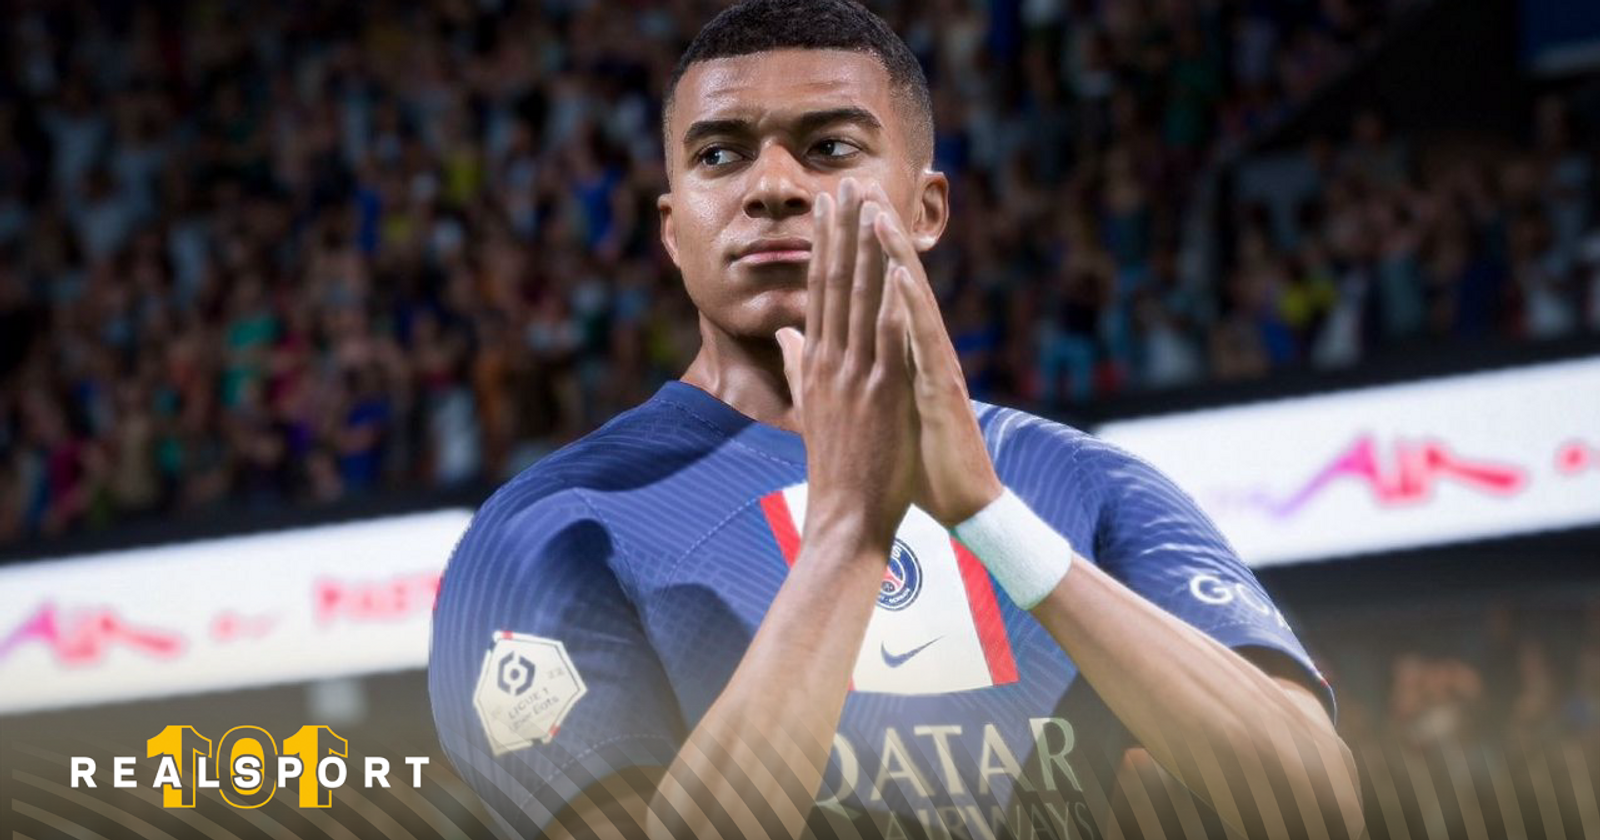 I PACKED MBAPPE ON FIFA 23 !!! 